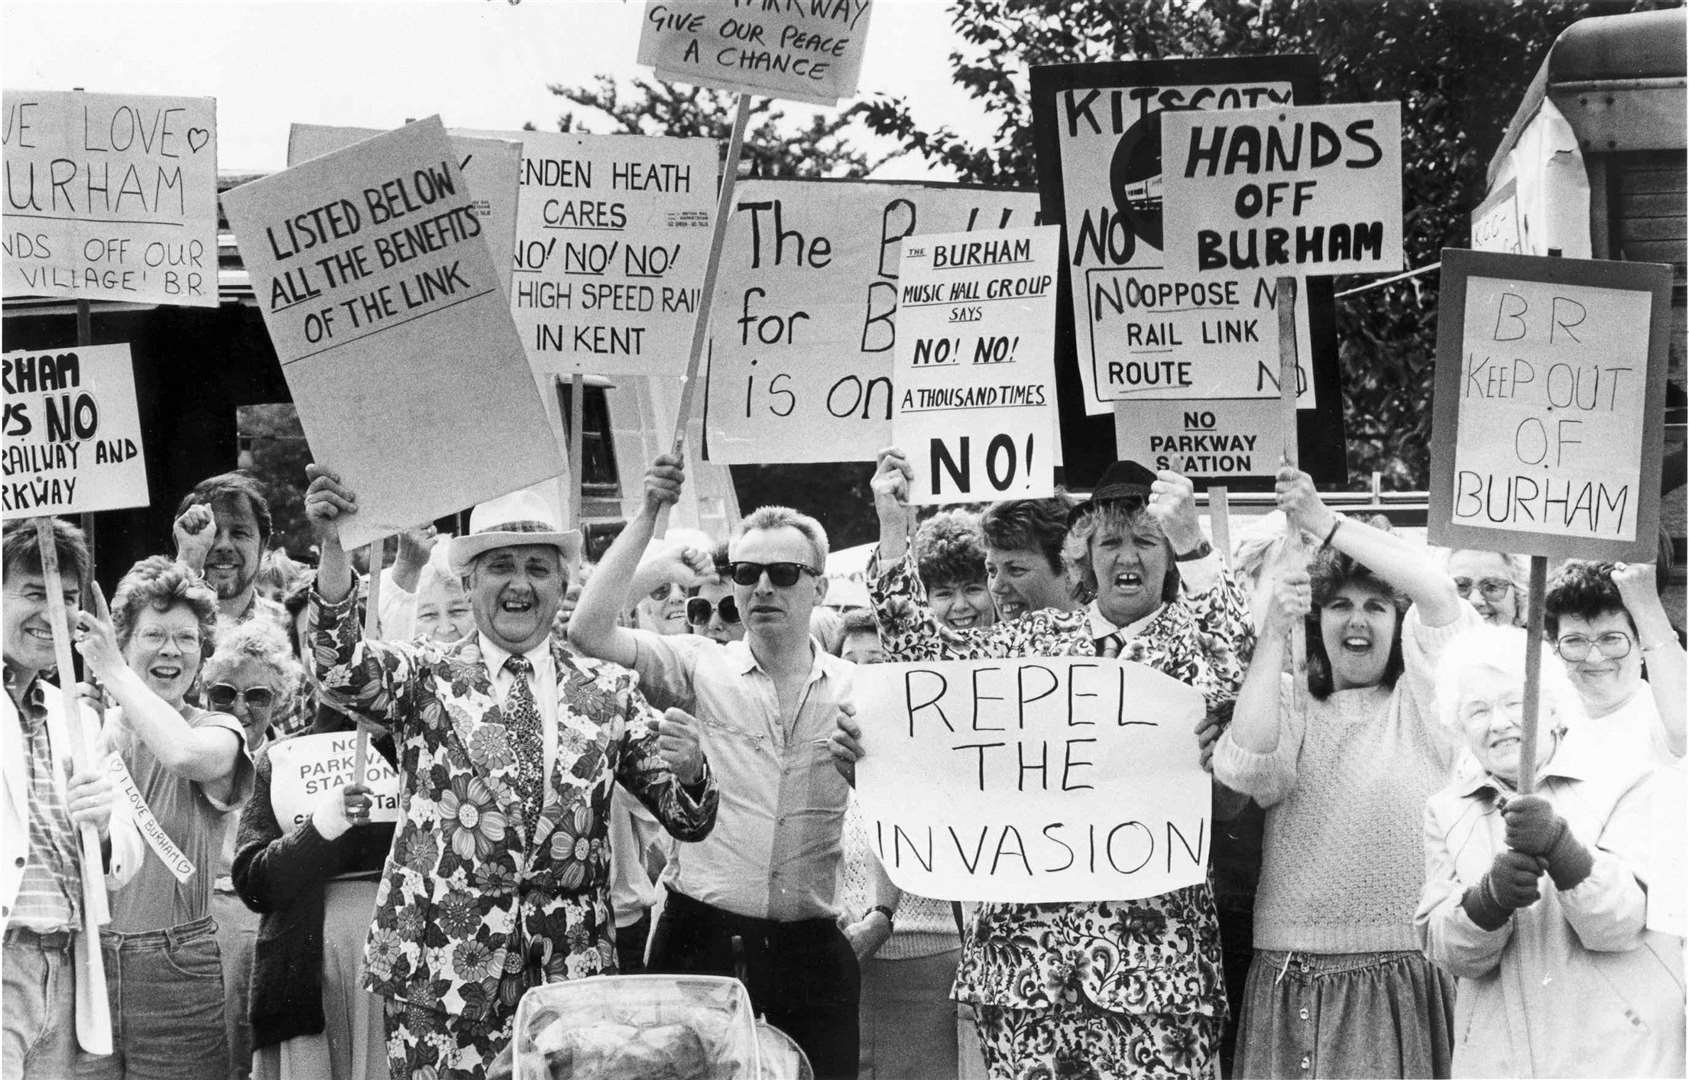 Burham residents in 1989 protest against the planned Channel Tunnel Rail Link route, which would run south of their village